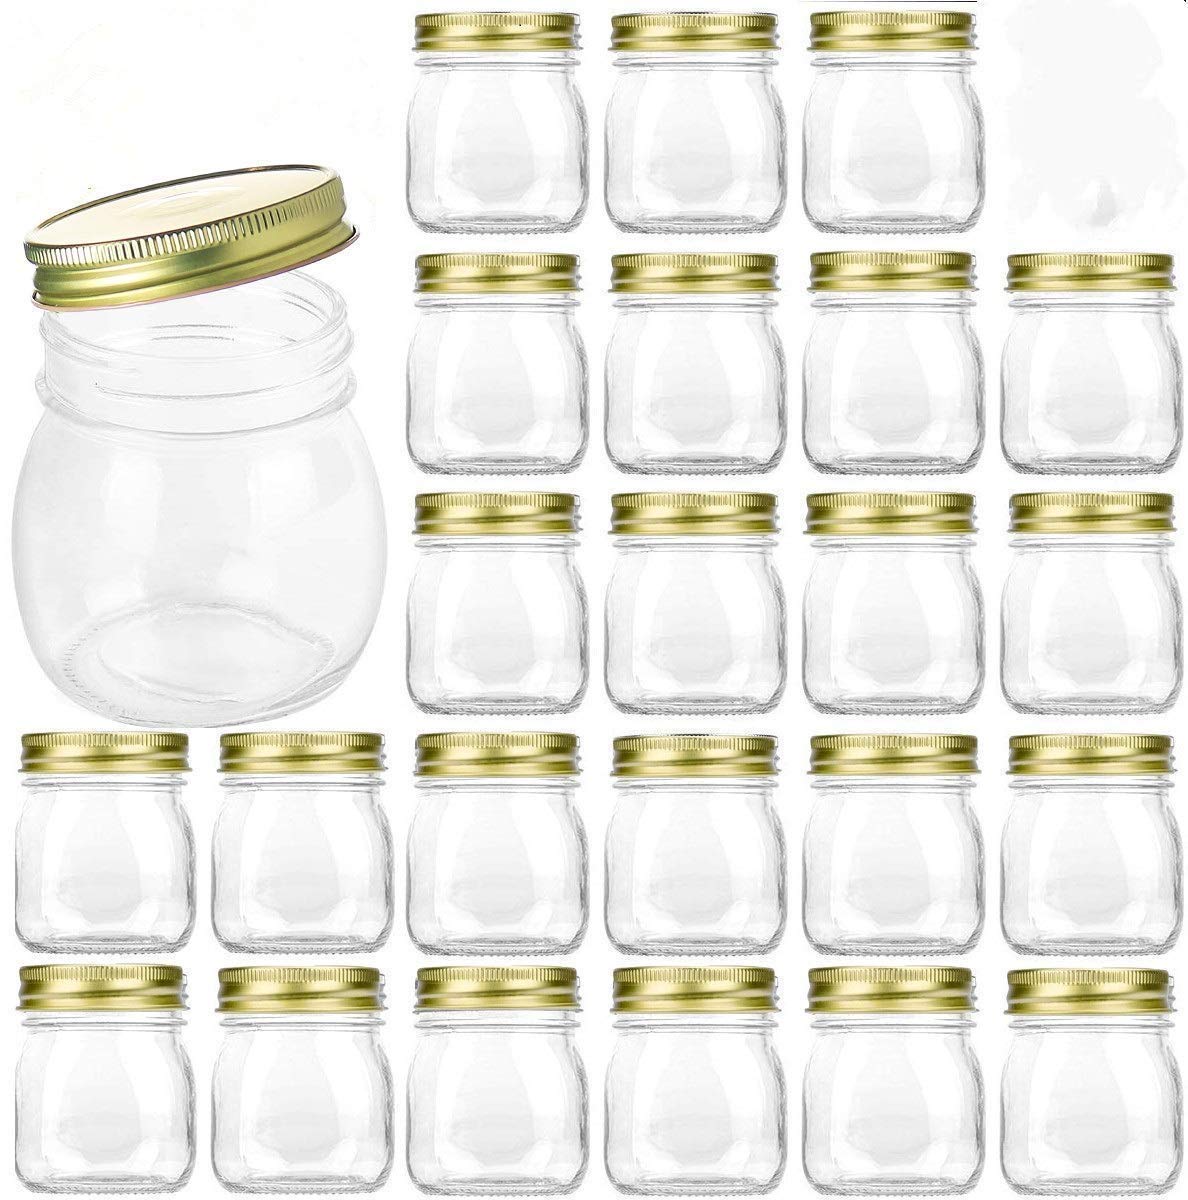 Encheng 10 oz Glass Jars With Lids,Ball Wide Mouth Mason Jars For Storage,Canning Jars For Caviar,Herb,Jelly,Jams,Honey,Dishware Safe,Set Of 24 …